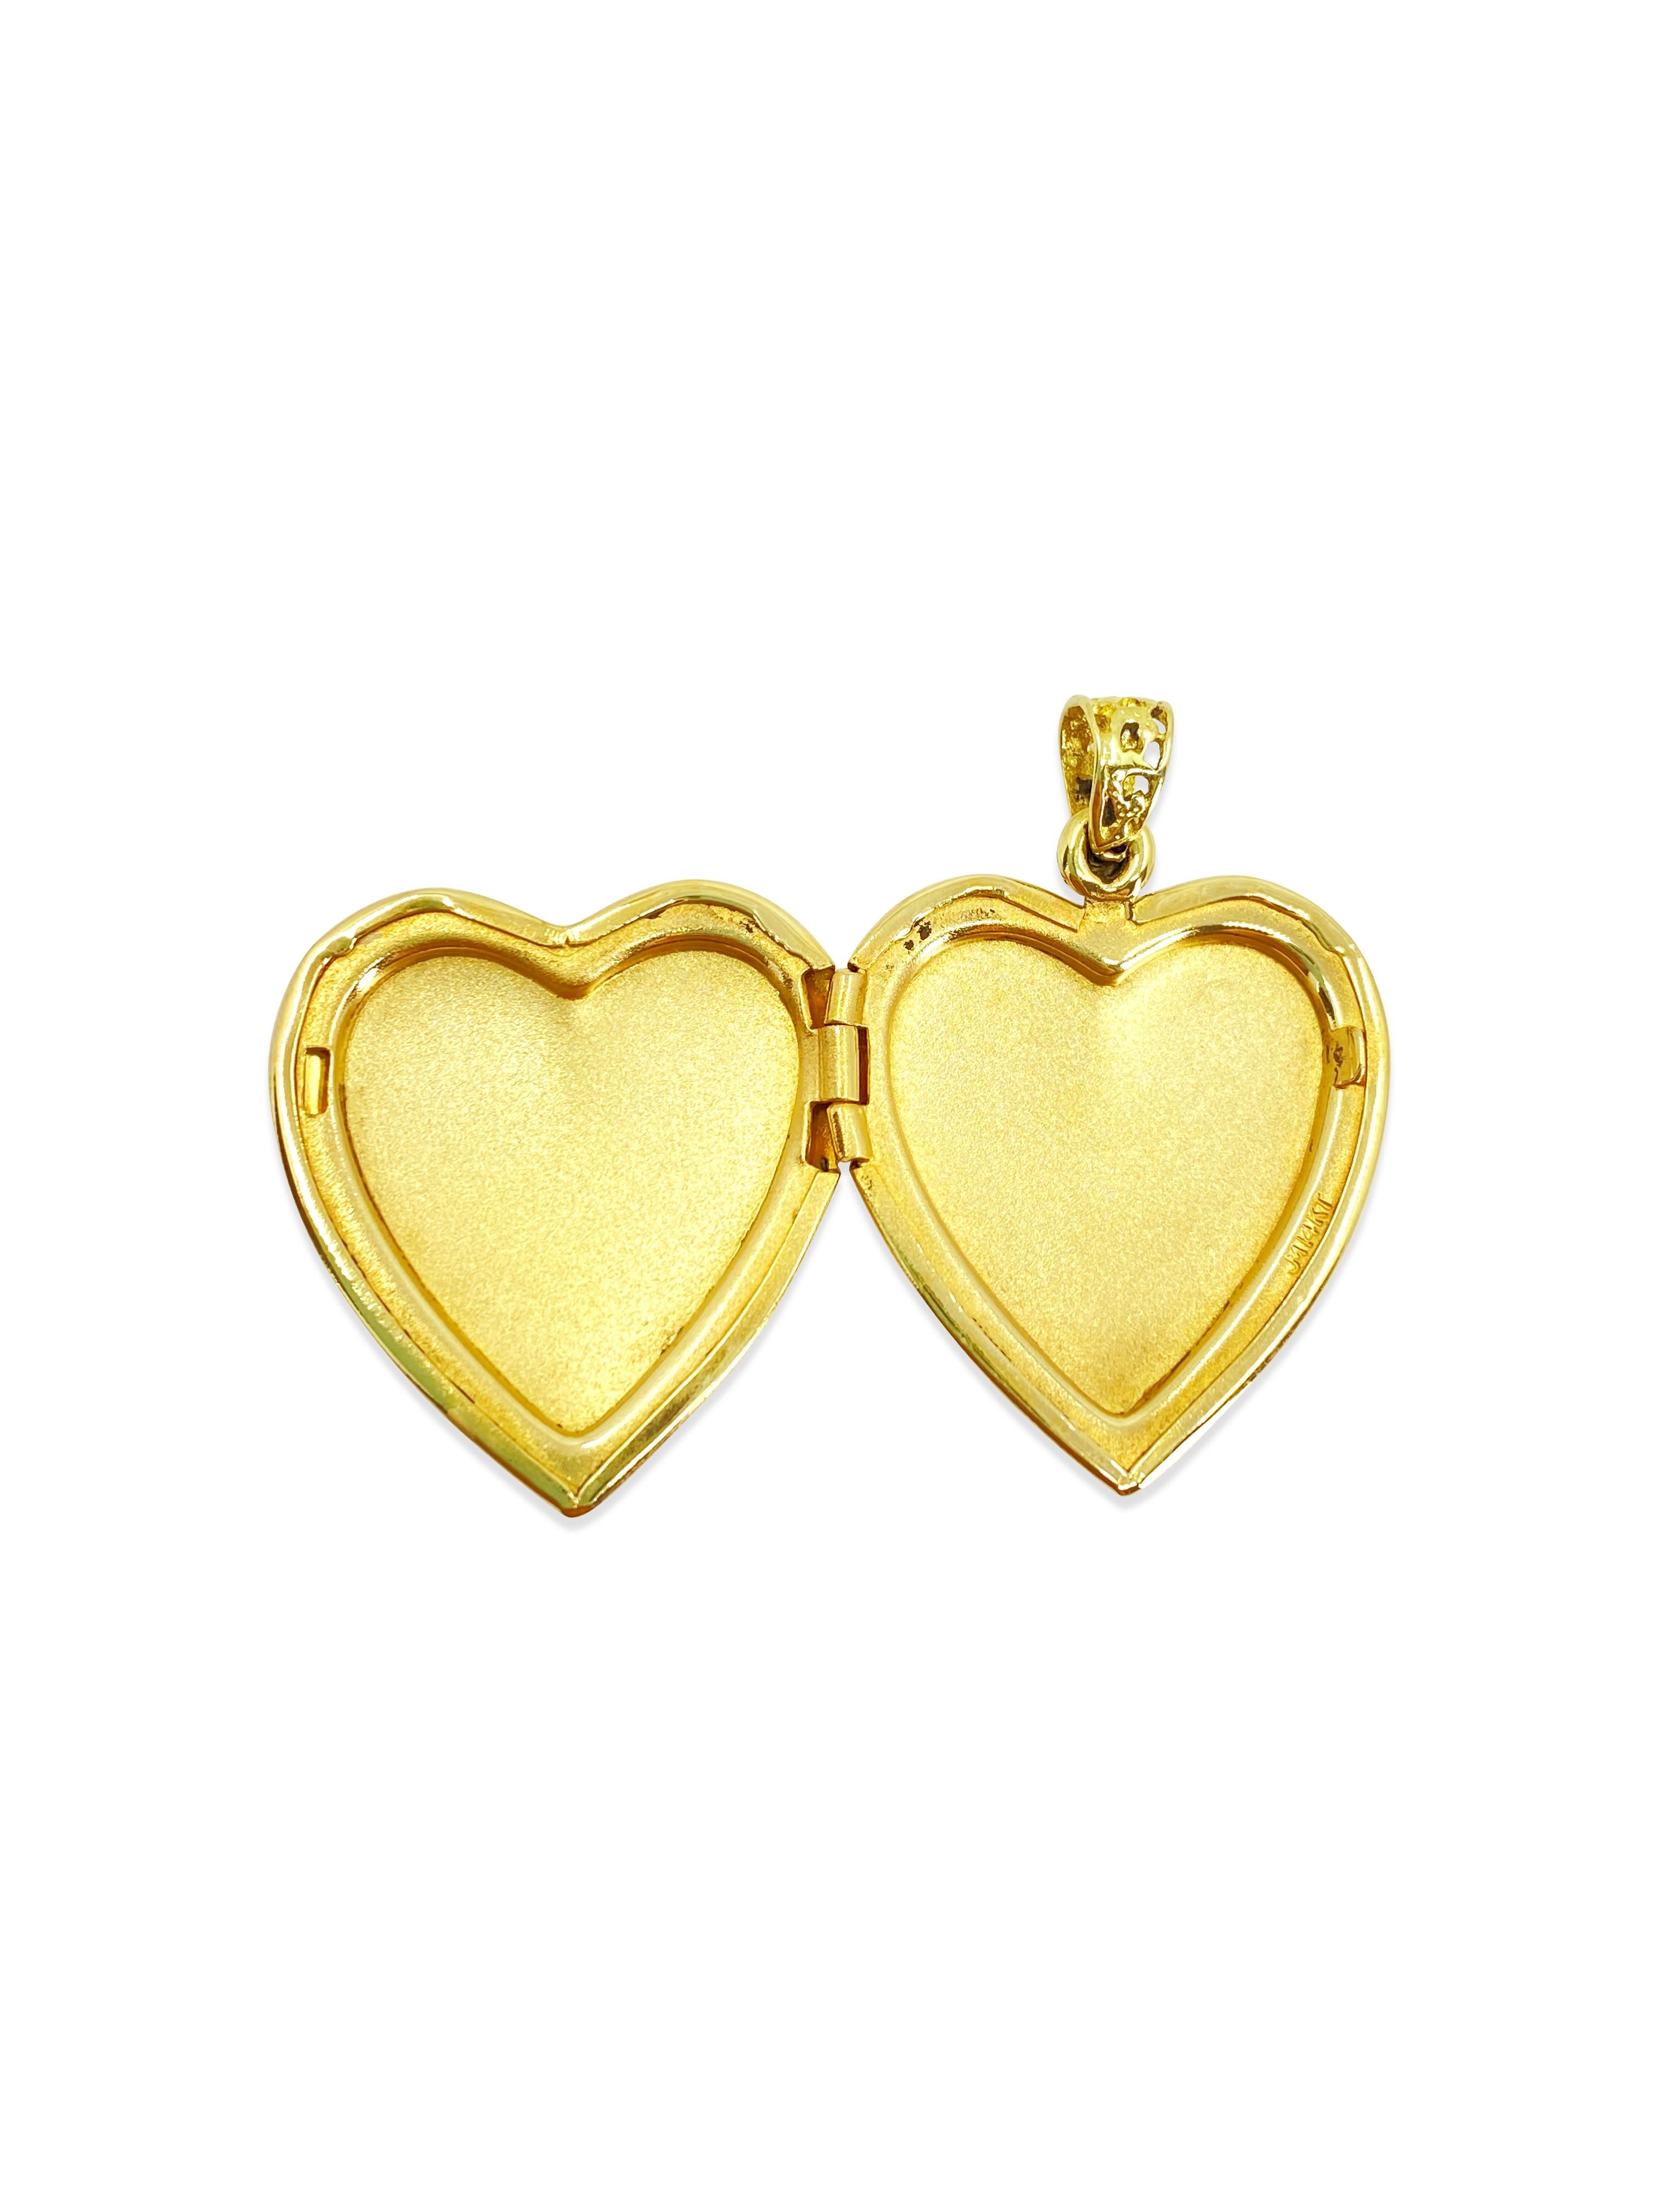 Vintage Heart Picture Pendant For Her in 14k Gold  In Excellent Condition For Sale In Miami, FL